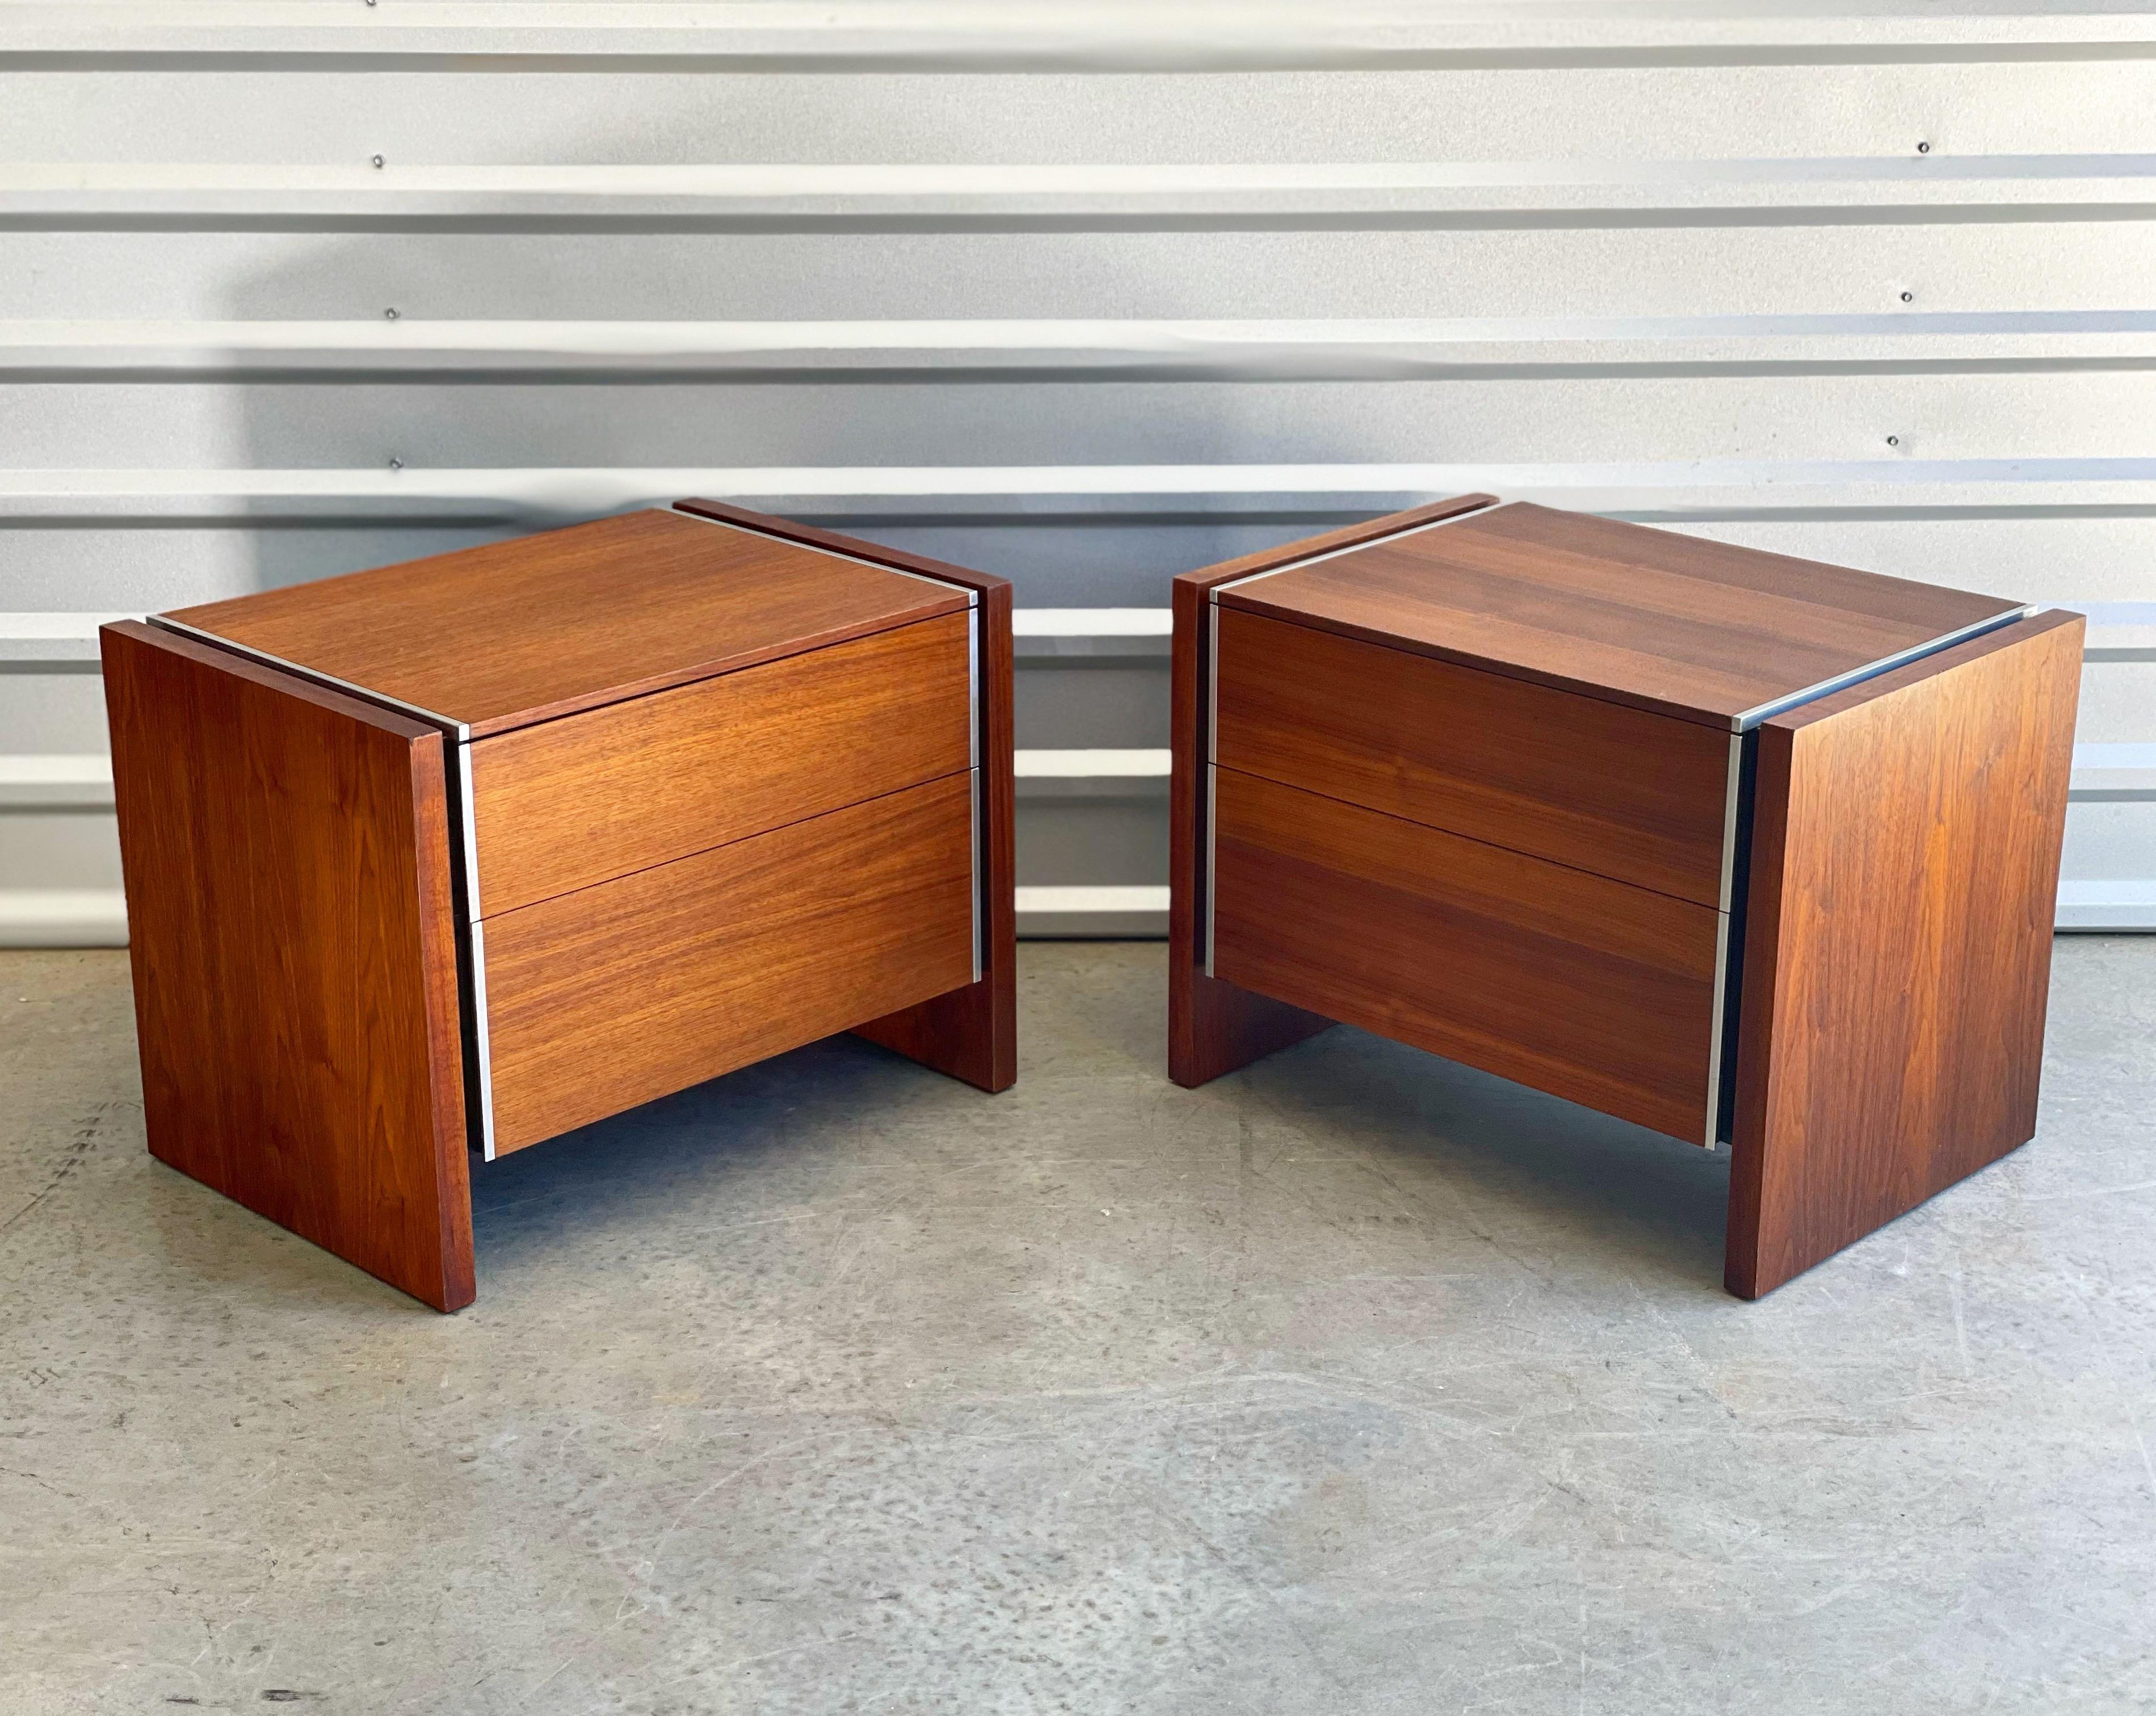 Mid-20th Century Pair of Midcentury Nightstands by Robert Baron for Glenn of California in Walnut